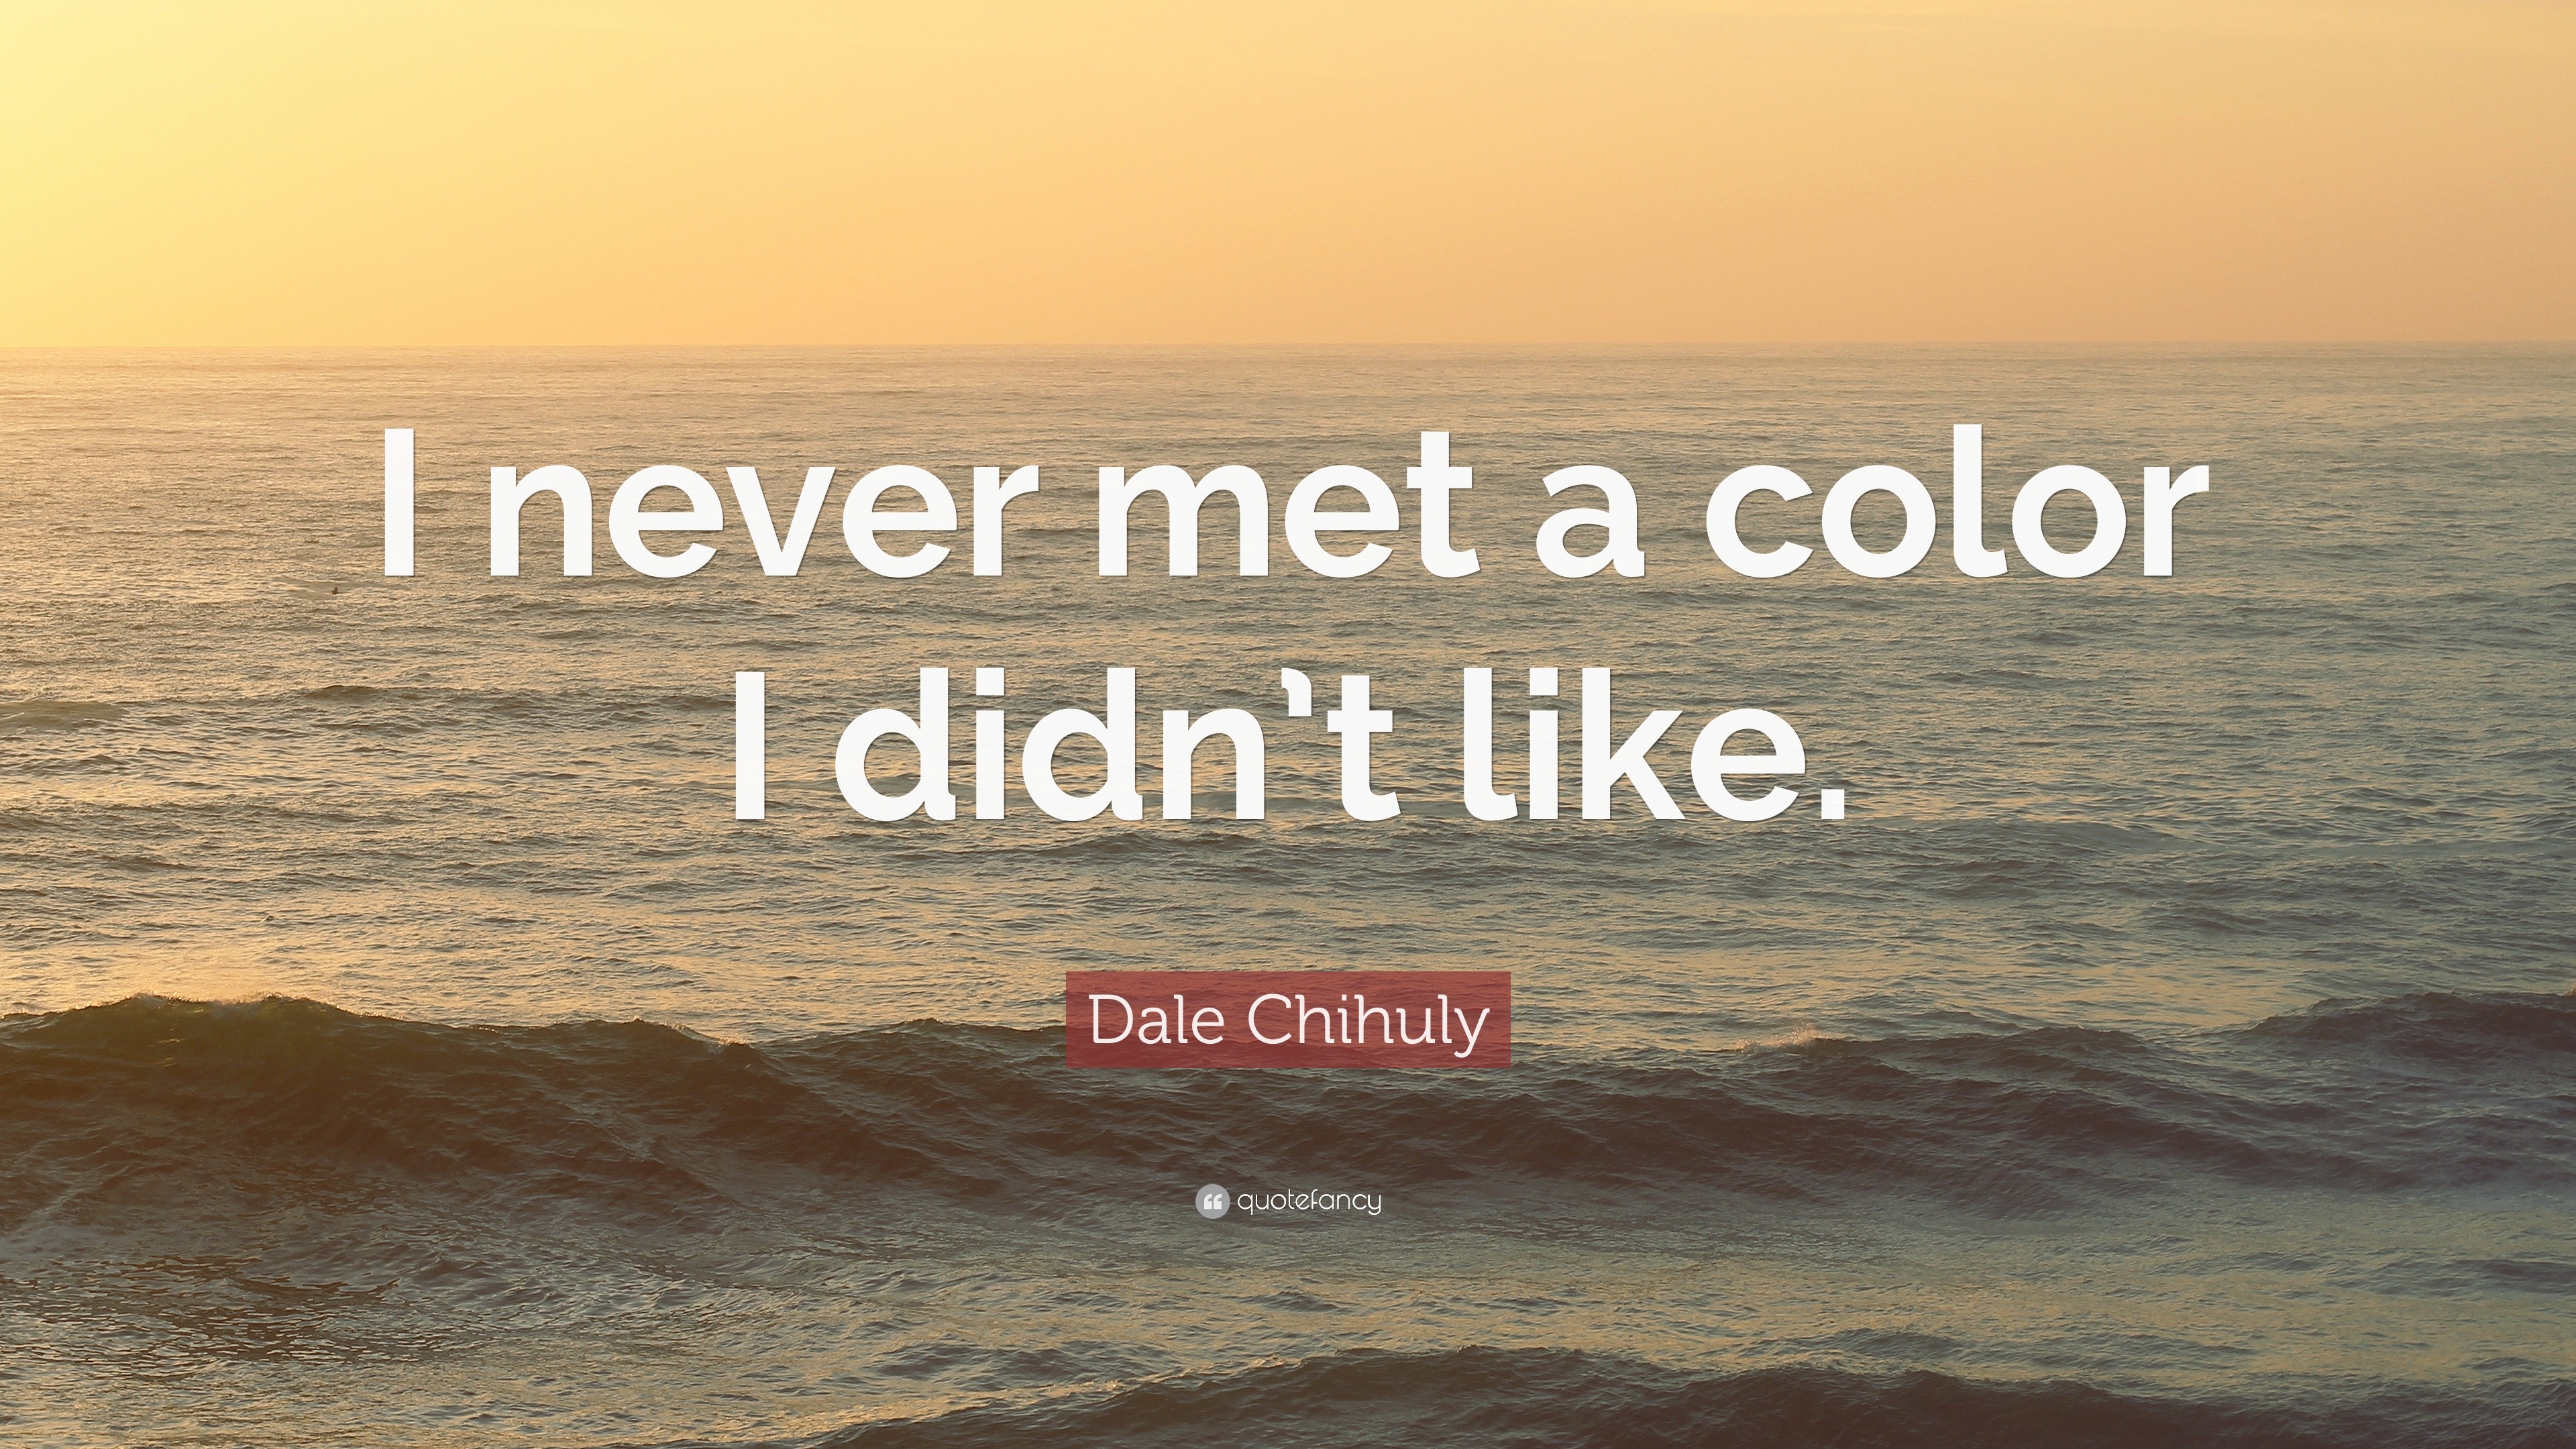 Dale Chihuly Quote: "I never met a color I didn't like." (12 wallpapers) - Quotefancy